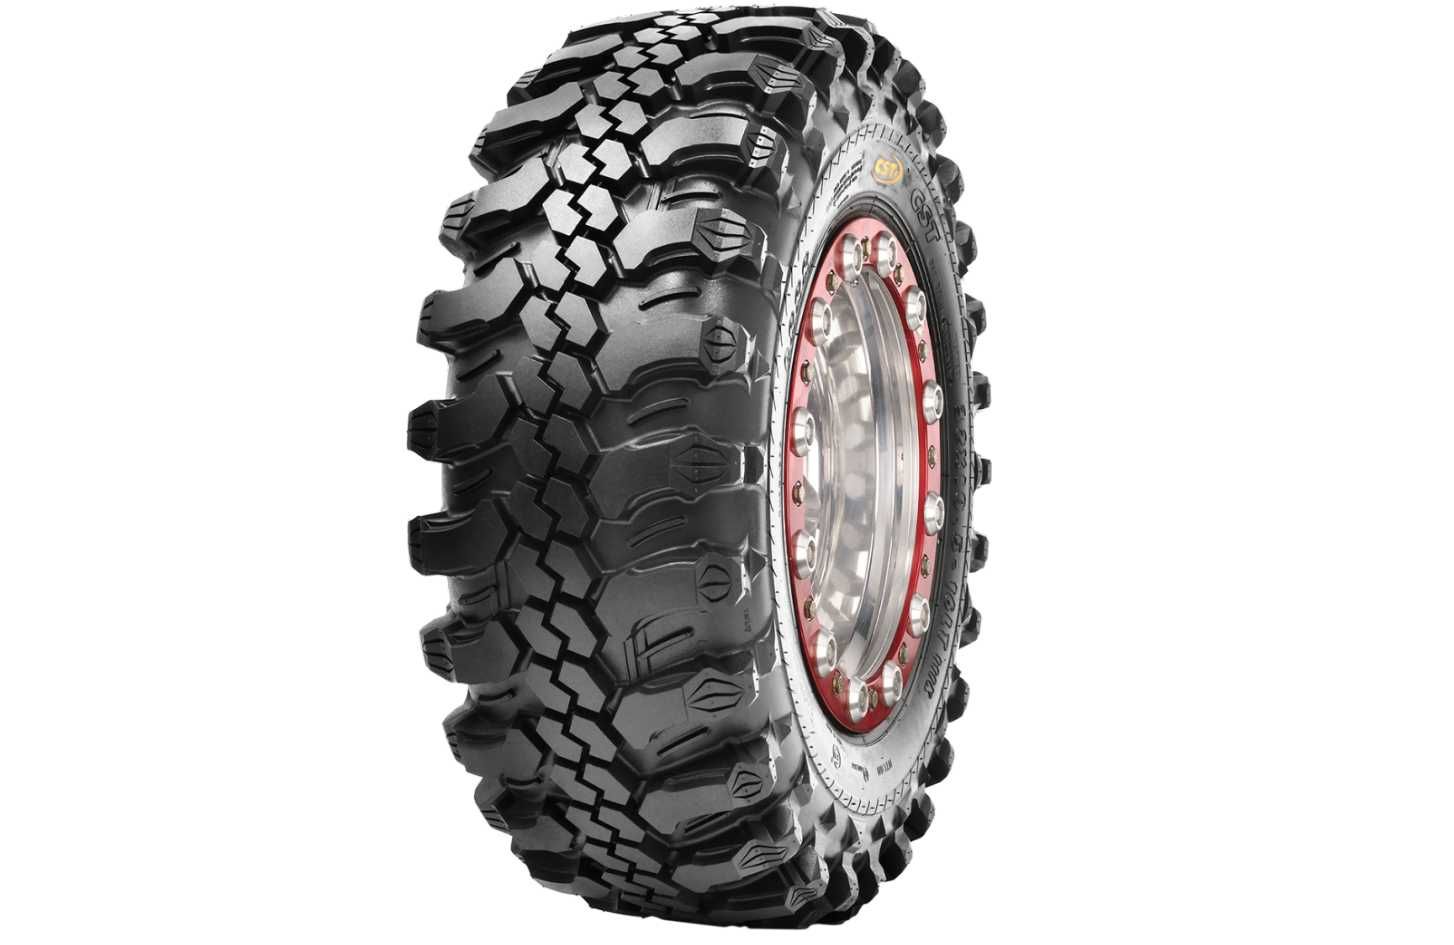 Anvelopa 32/10.5 R16 | 285/75 R16 Cst by Maxxis C888 111K